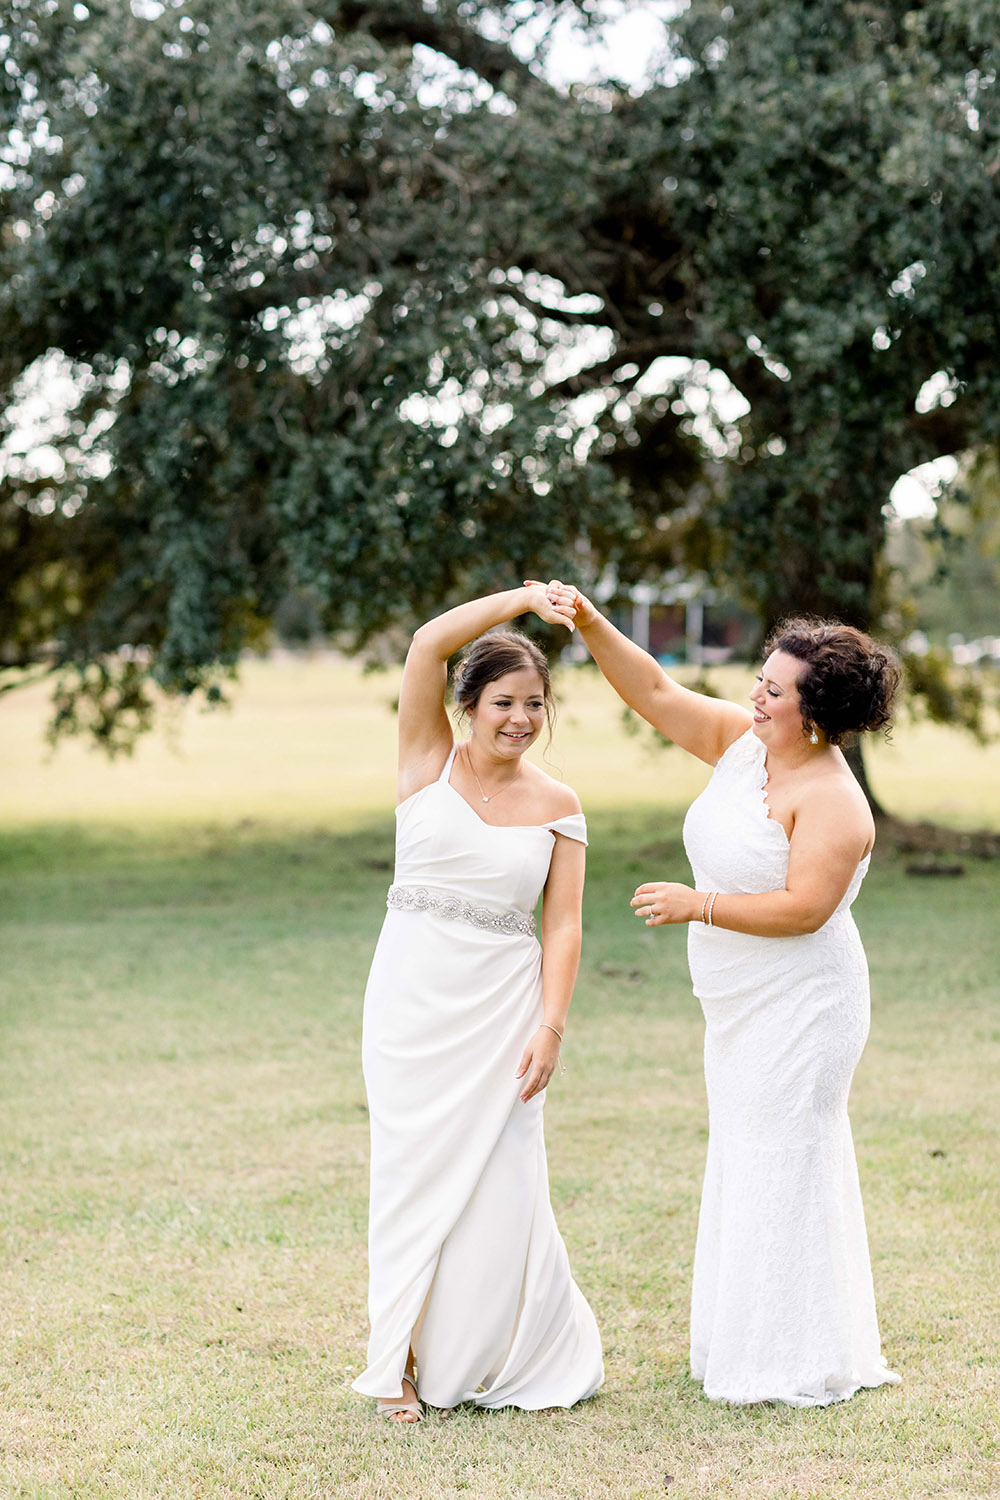 the brides dance during their first look